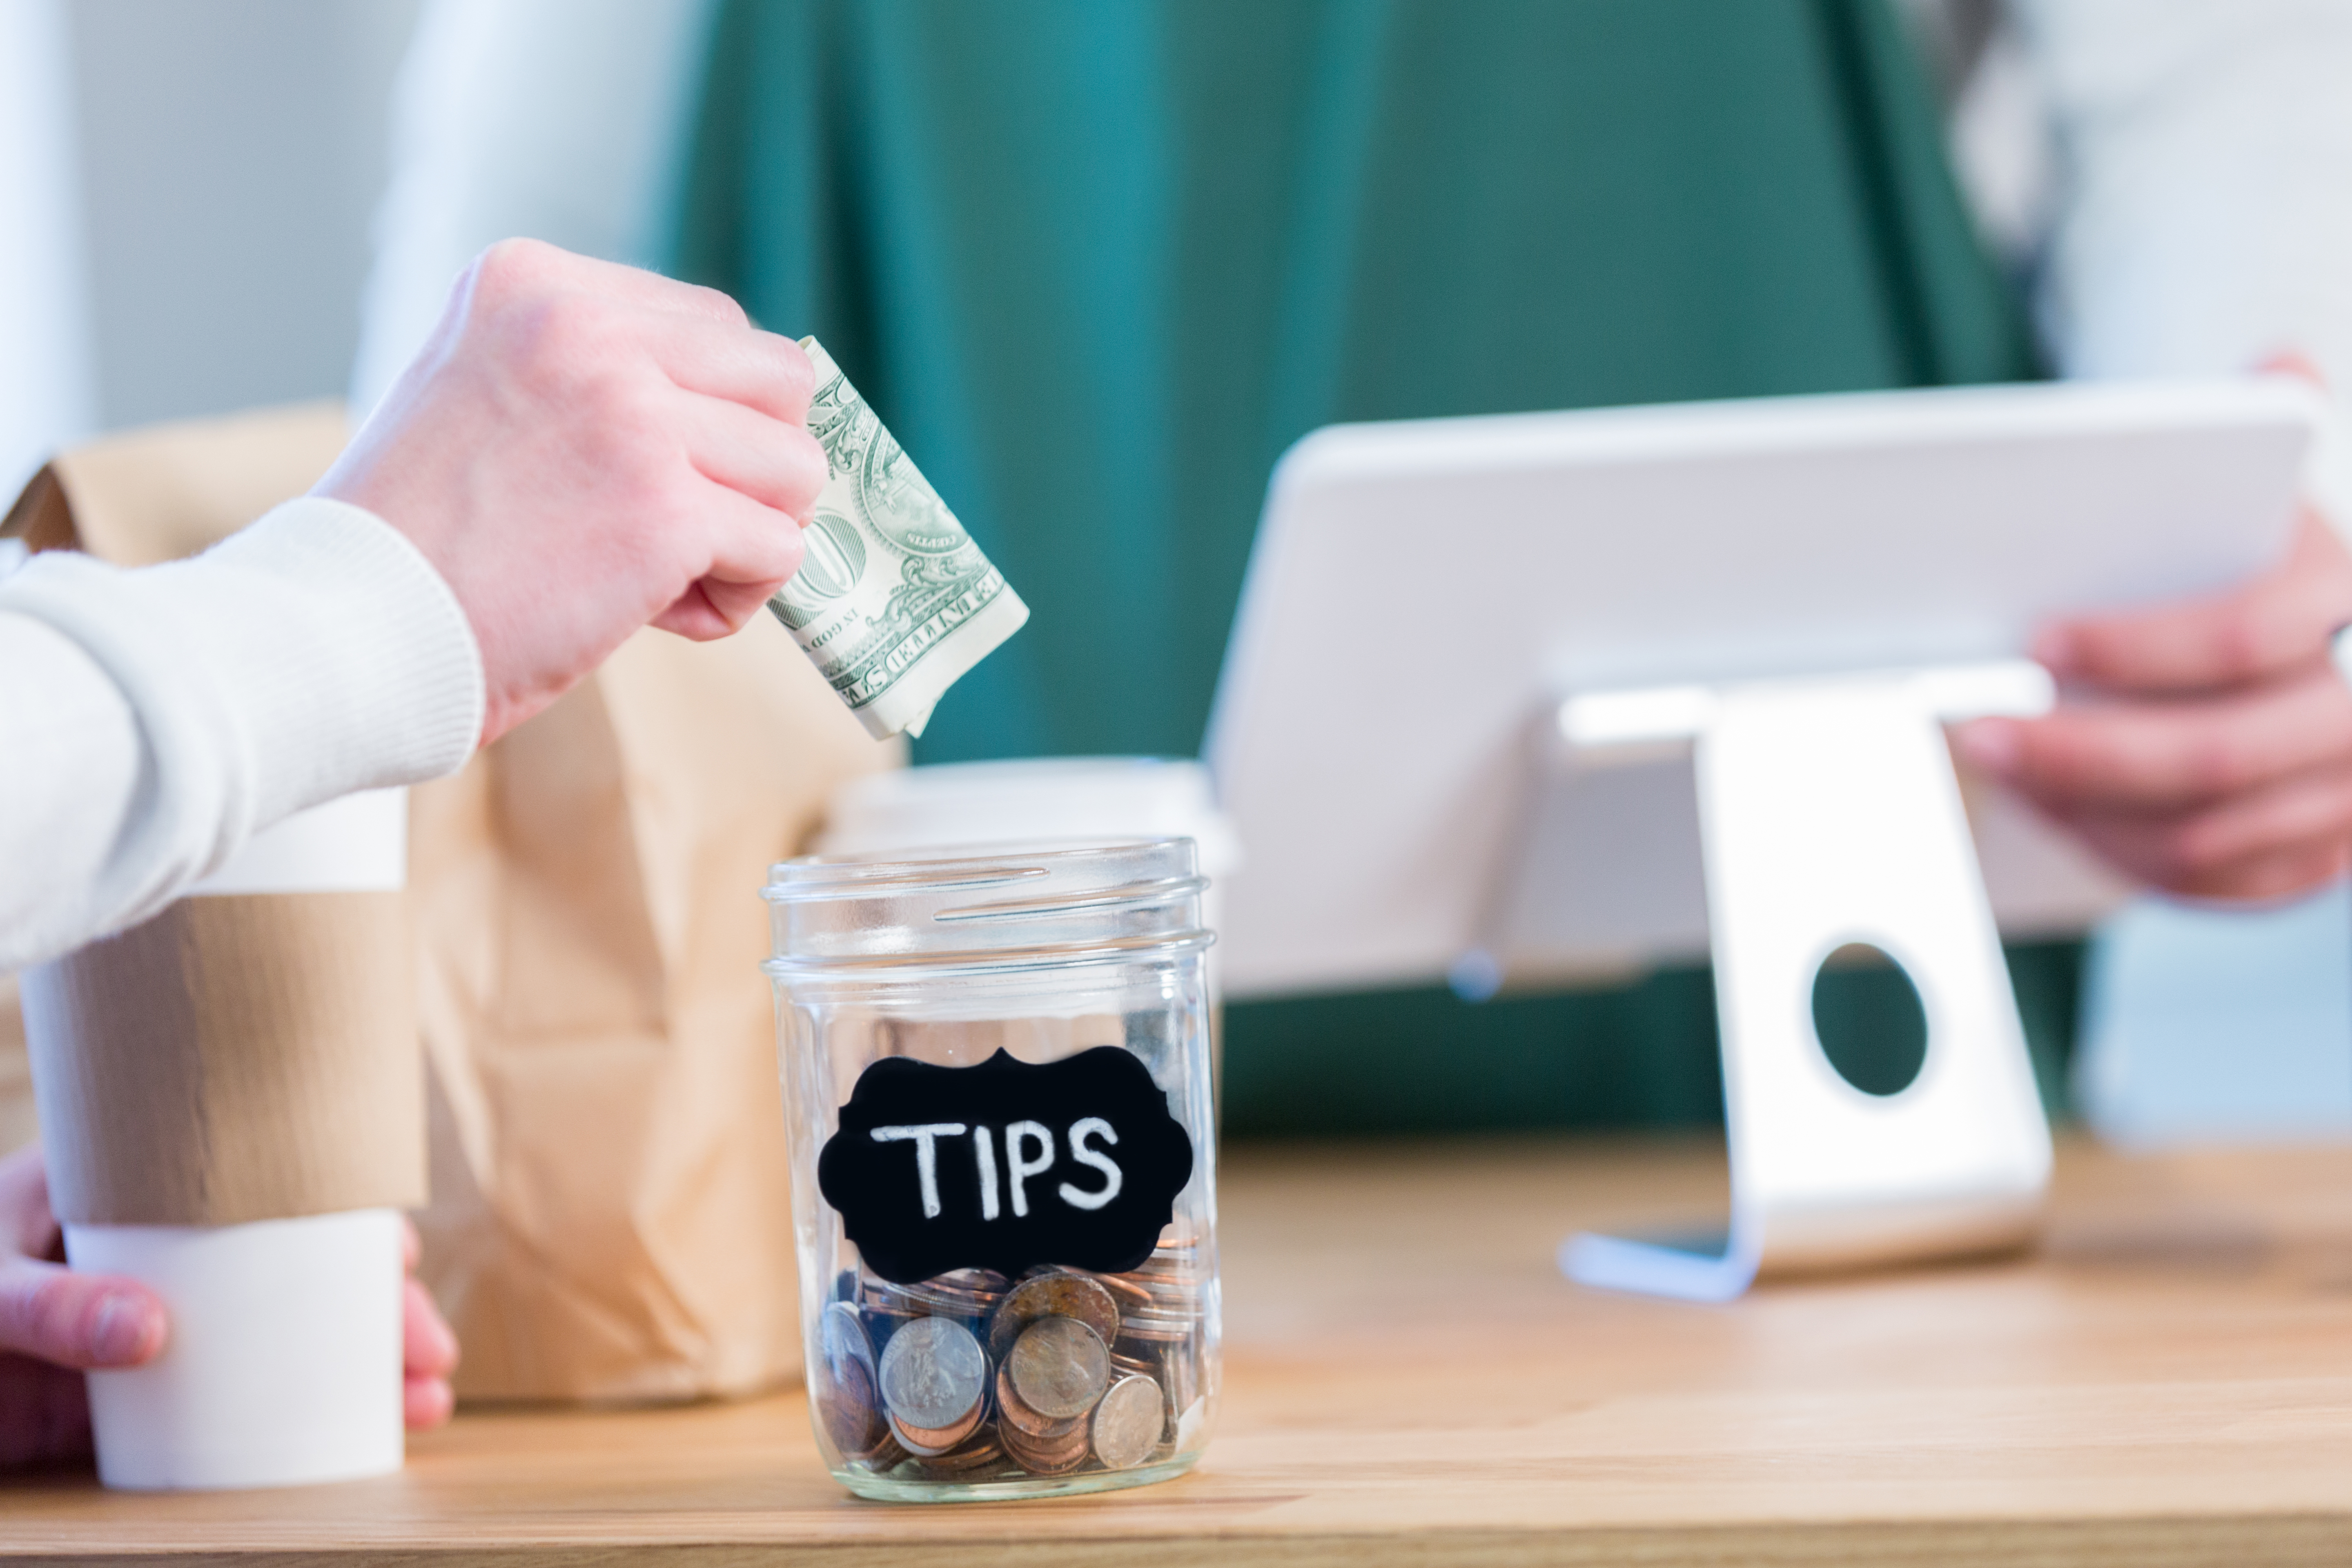 Is Tipping Getting Out of Control? A Lot of People Seem to Think So